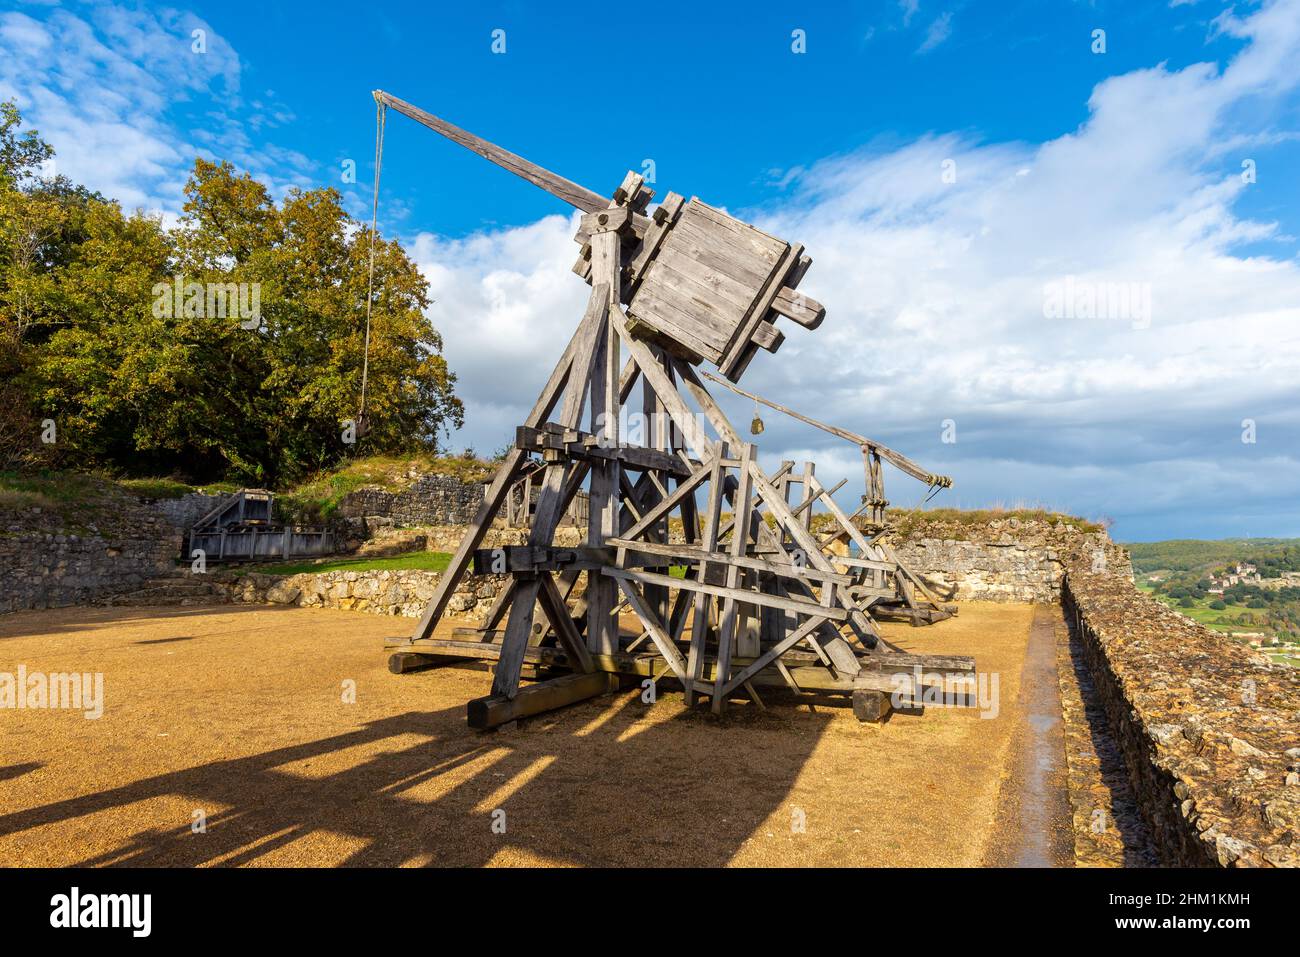 A medieval war catapult located in the Castelnaud fortress. Taken in Perigord, France, on a sunny autumn afternoon Stock Photo